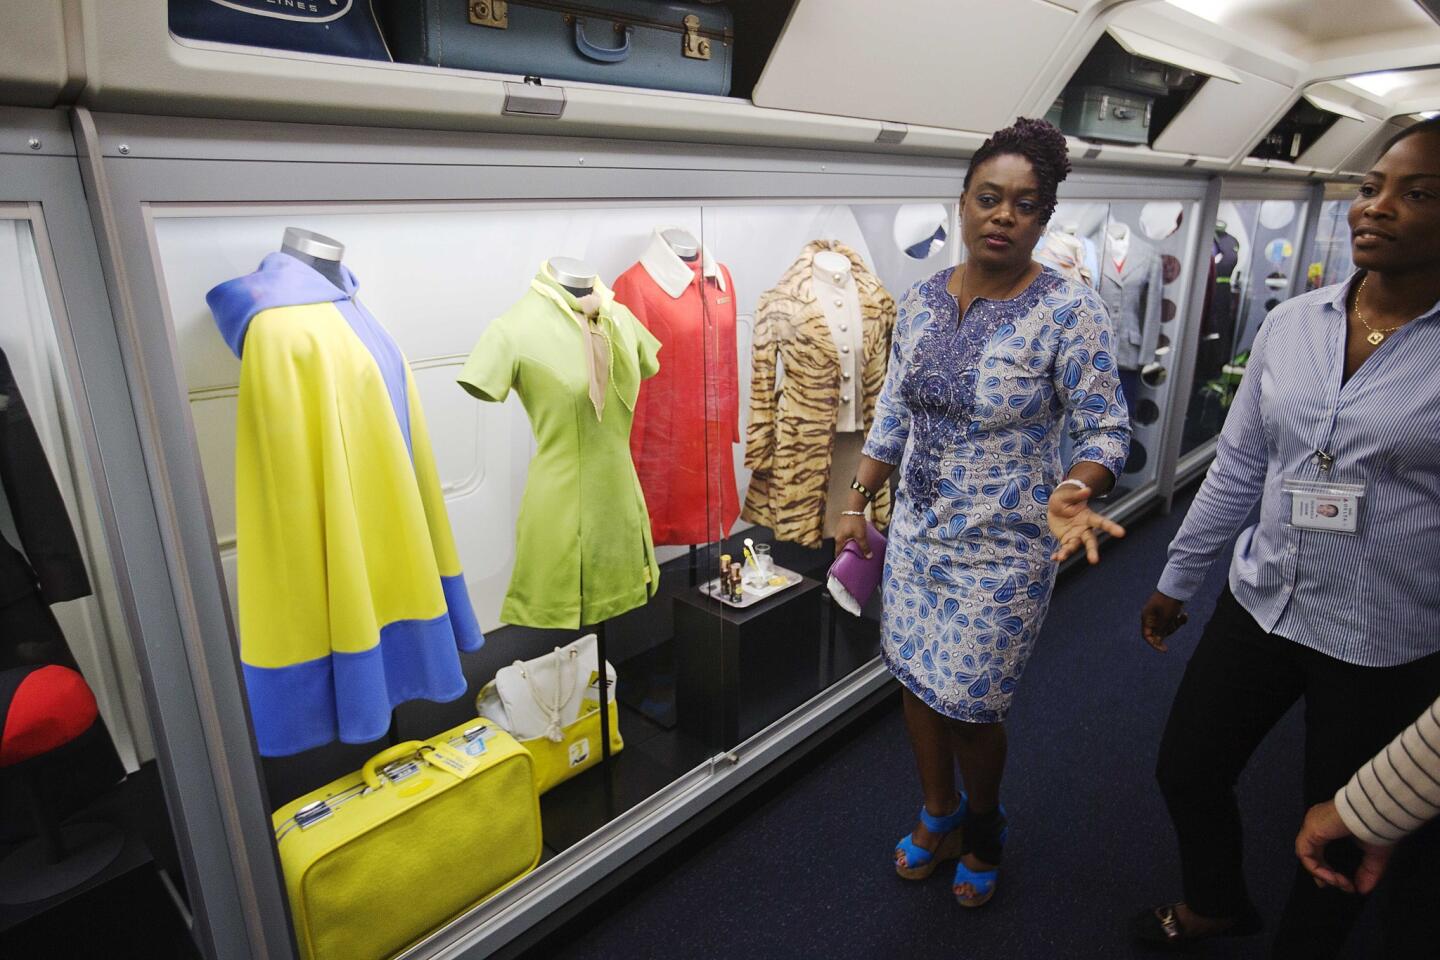 Vintage flight attendant uniforms are showcased in an exhibit at the Delta museum's grand reopening.